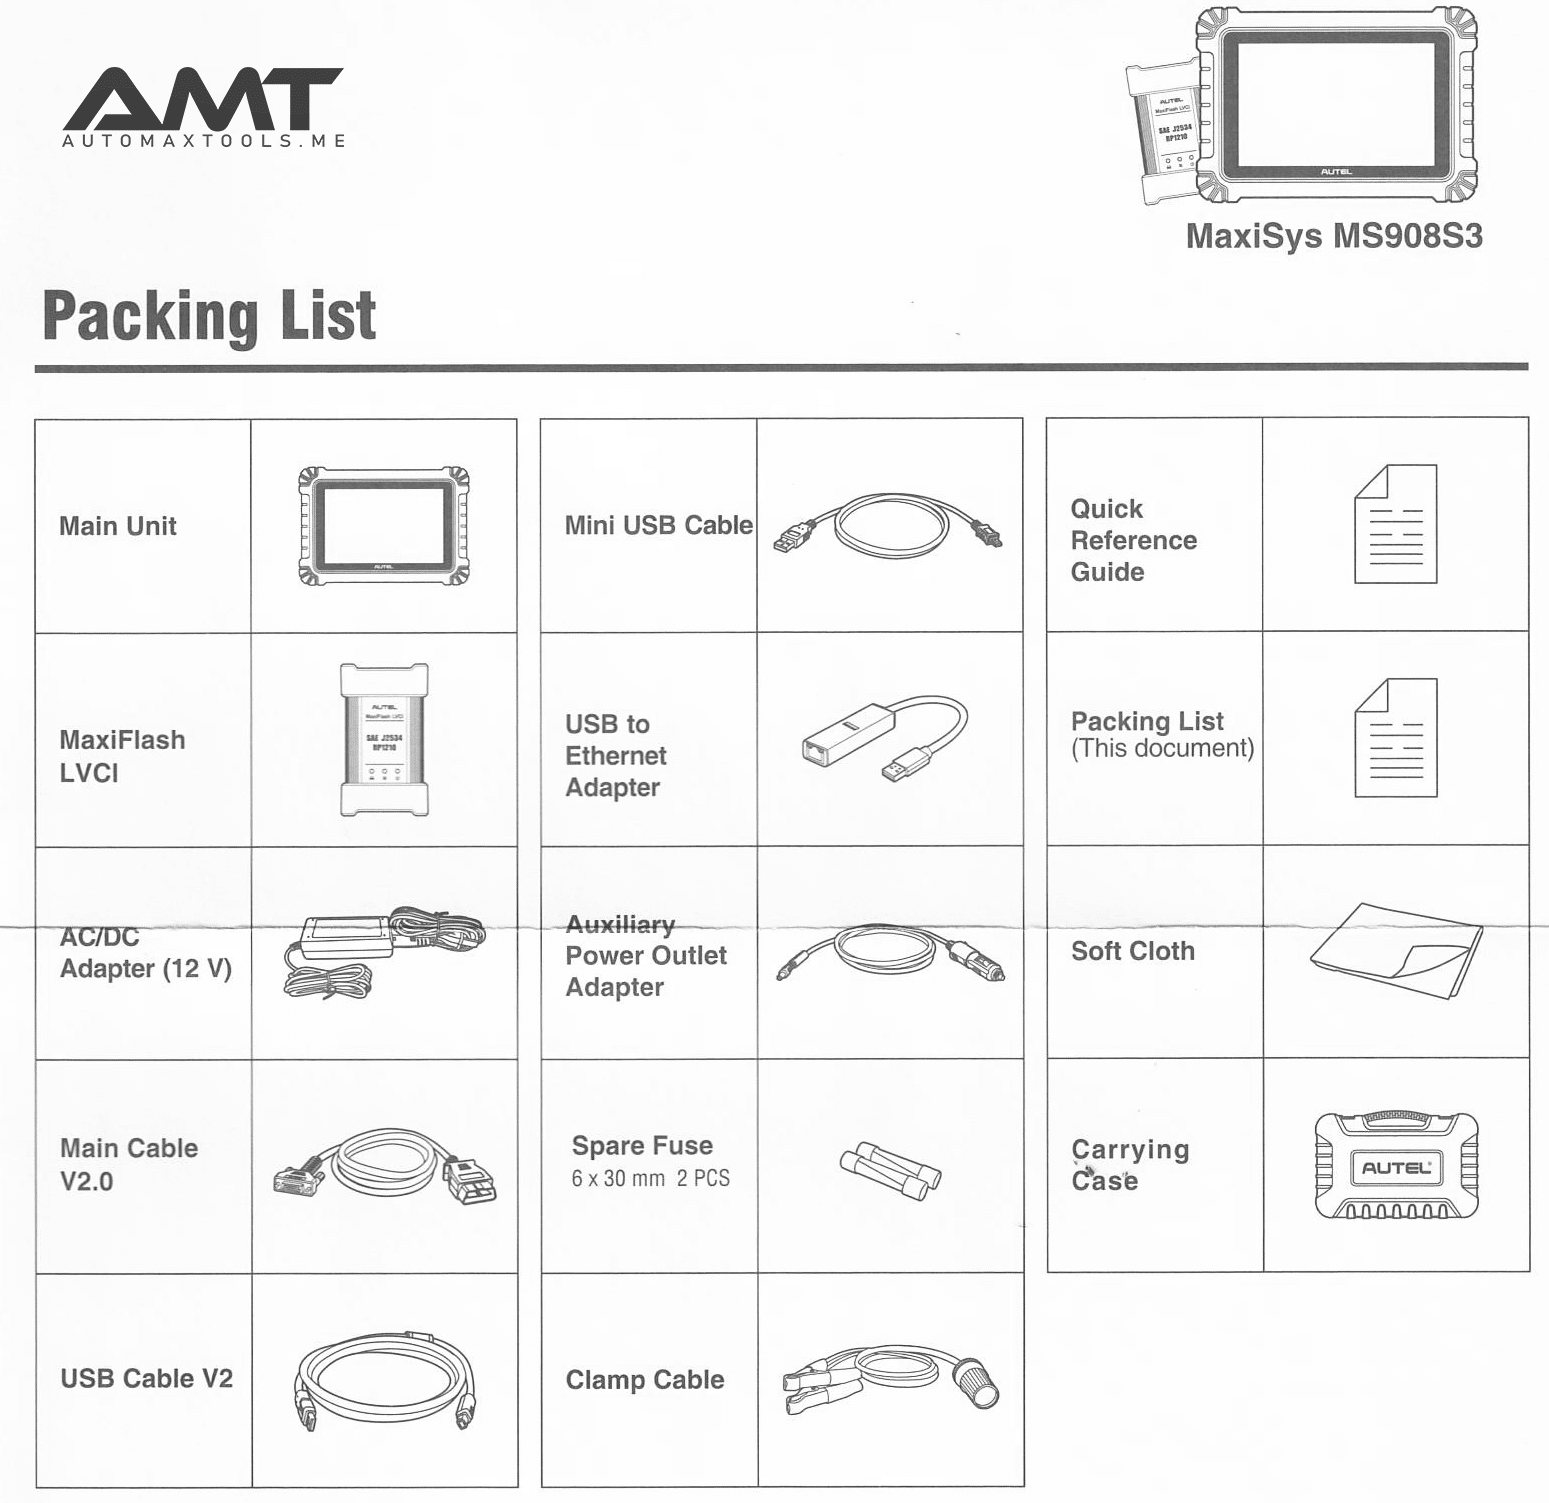 mx908s3 packing list